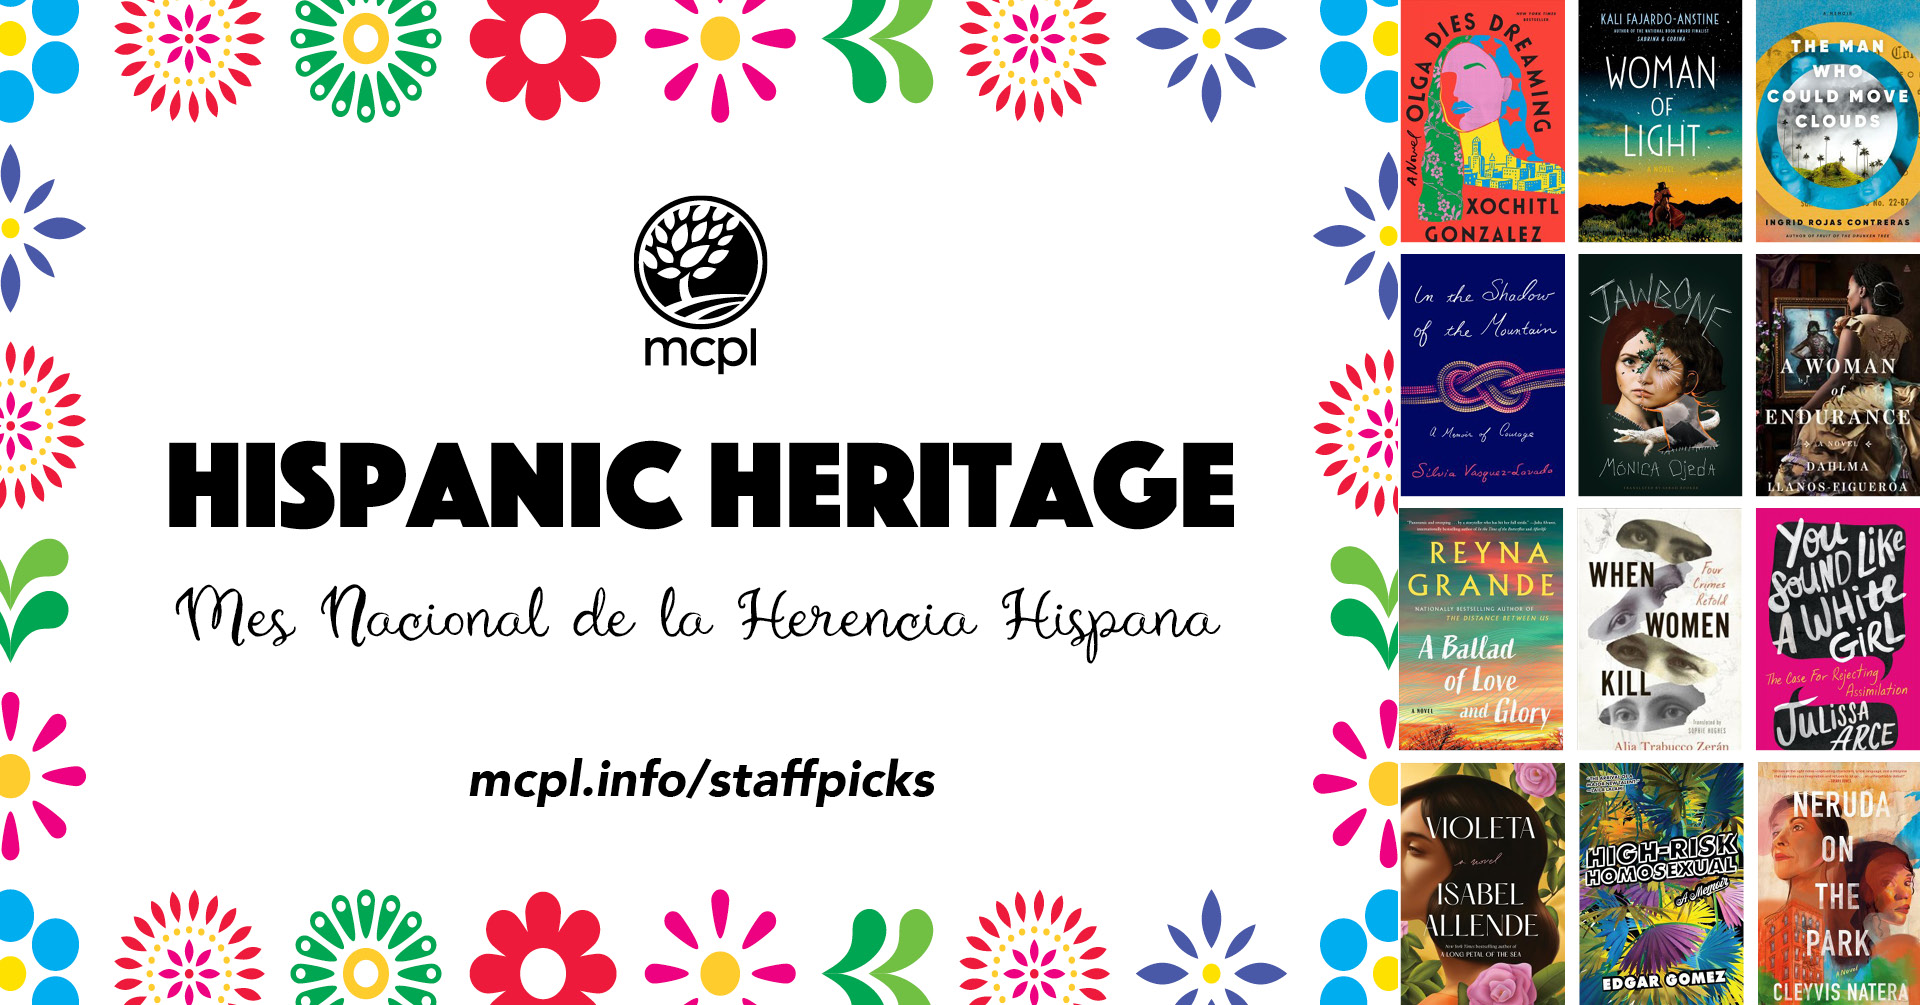 Collage of book covers from the list with the text "Hispanic Heritage" and "Mes Nacional de la Herencia Hispana".